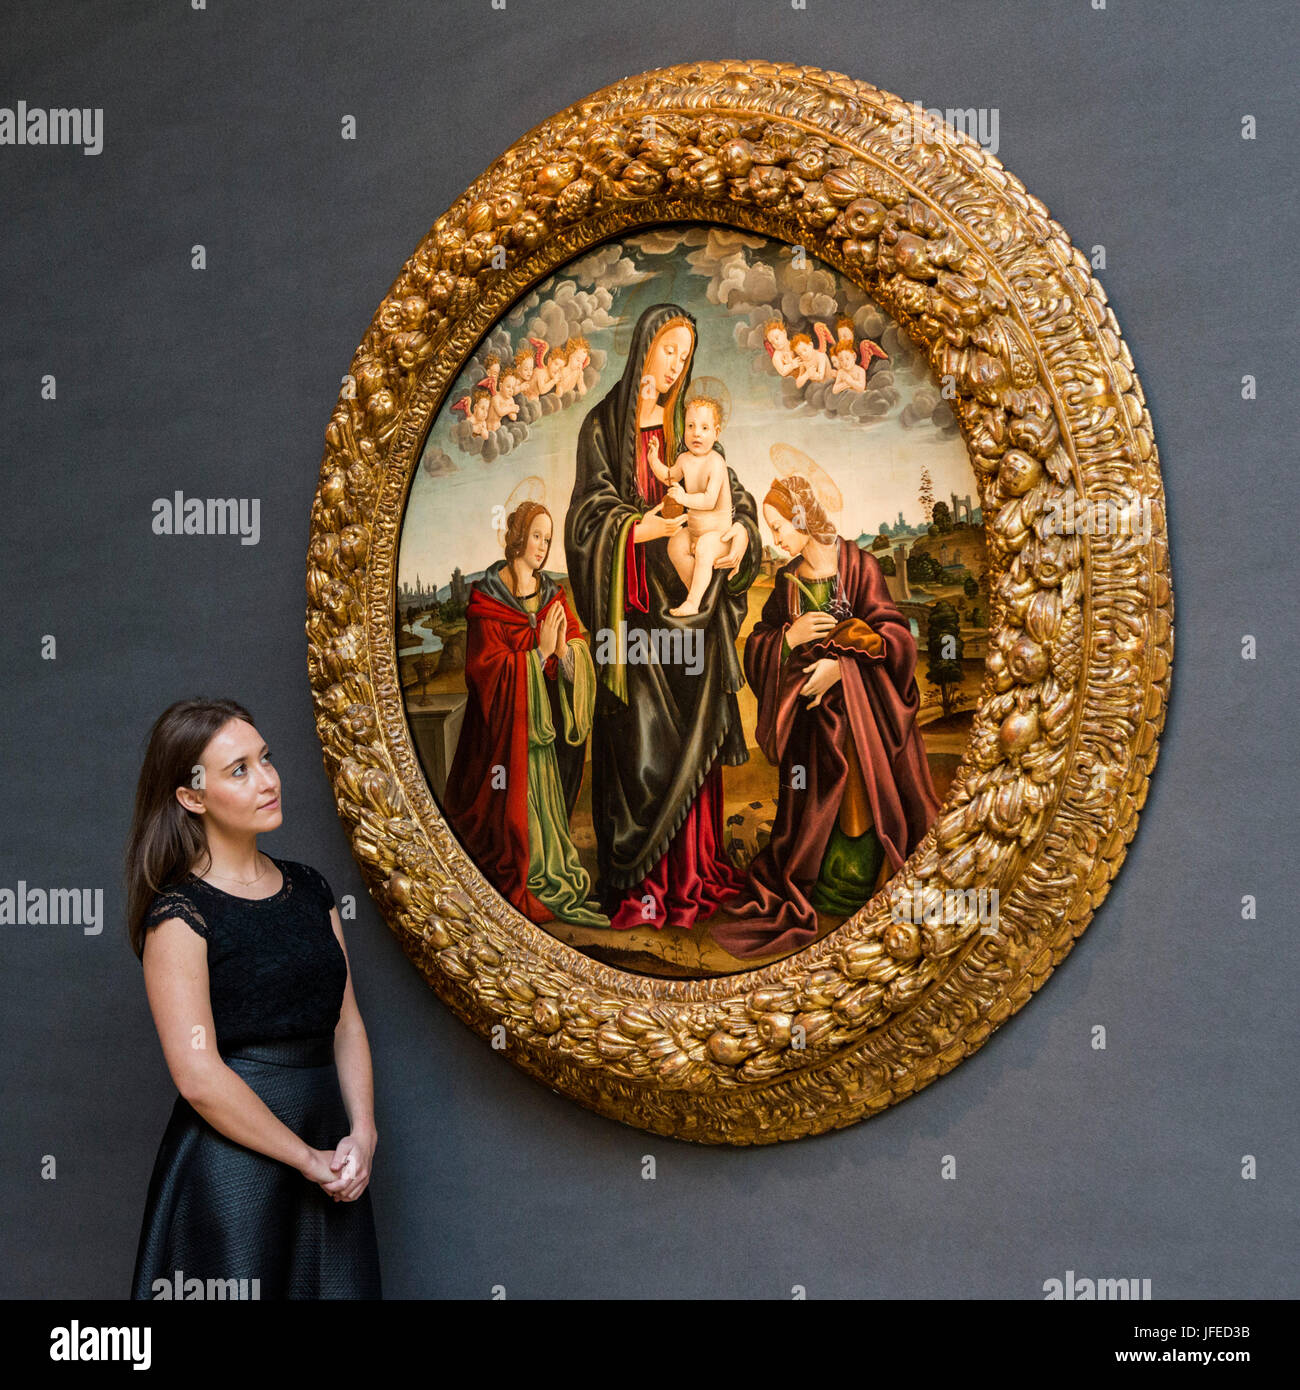 London, UK. 30 June 2017. A Christie's employee looks at The Madonna and Child with Sains Mary Magdalene and Catherine, by The Master of Memphis, est. GBP 200,000-300,000. Christie's present highlights from their forthcoming Old Masters Evening Sale on 6 July 2017 during Christie's Classic Week. Stock Photo